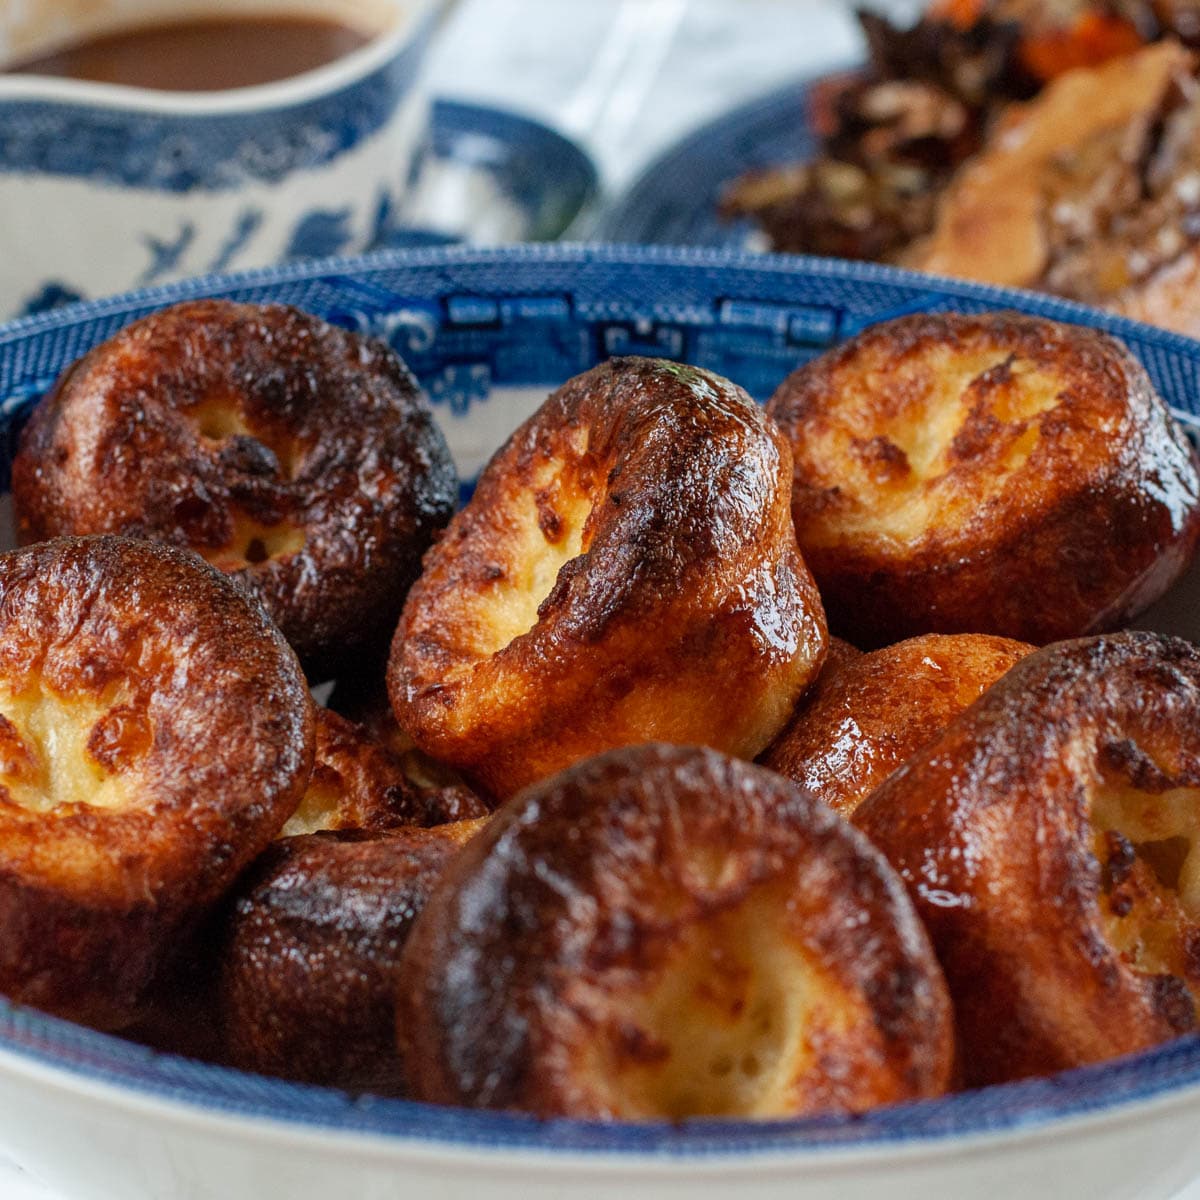 Yorkshire pudding served with stuffed pork